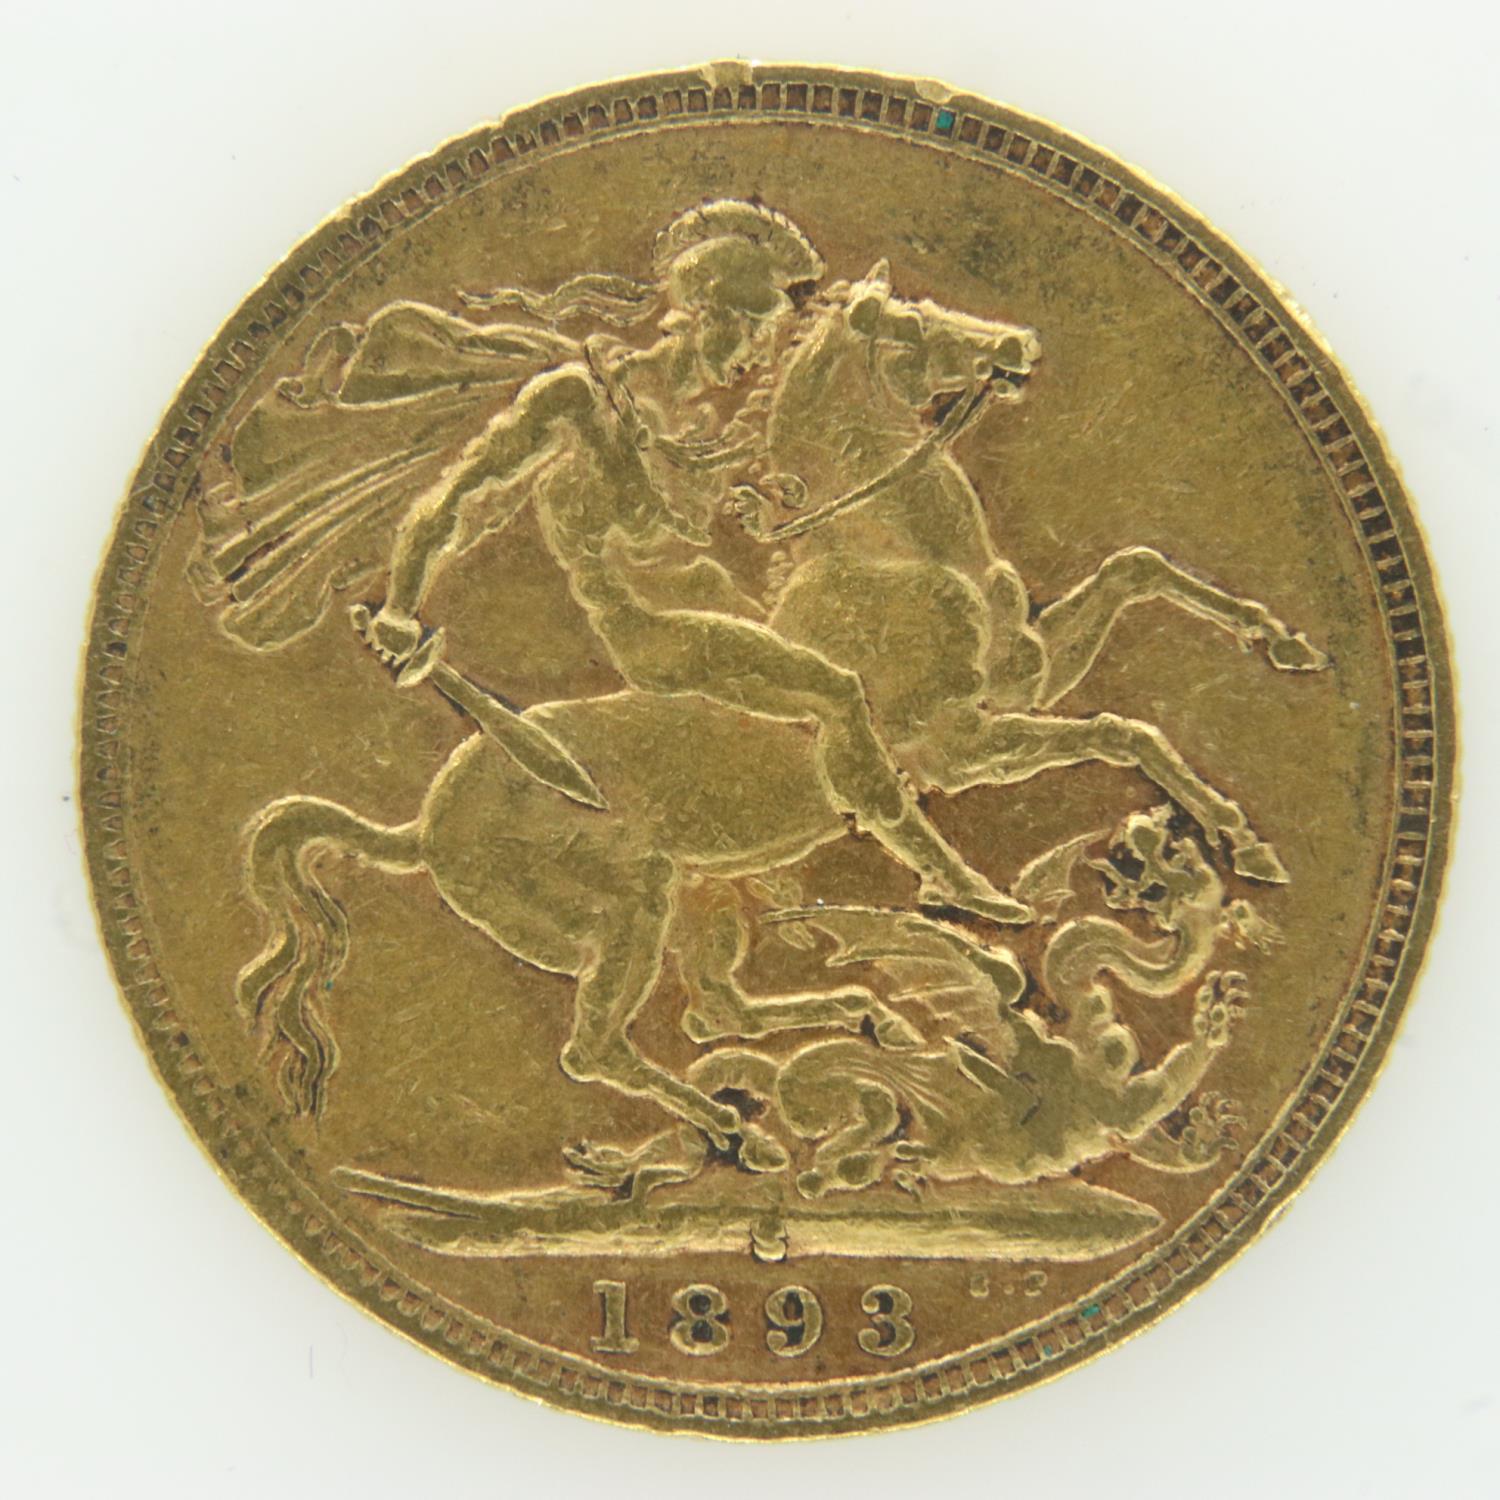 1893 gold full sovereign, Sydney mint. UK P&P Group 0 (£6+VAT for the first lot and £1+VAT for